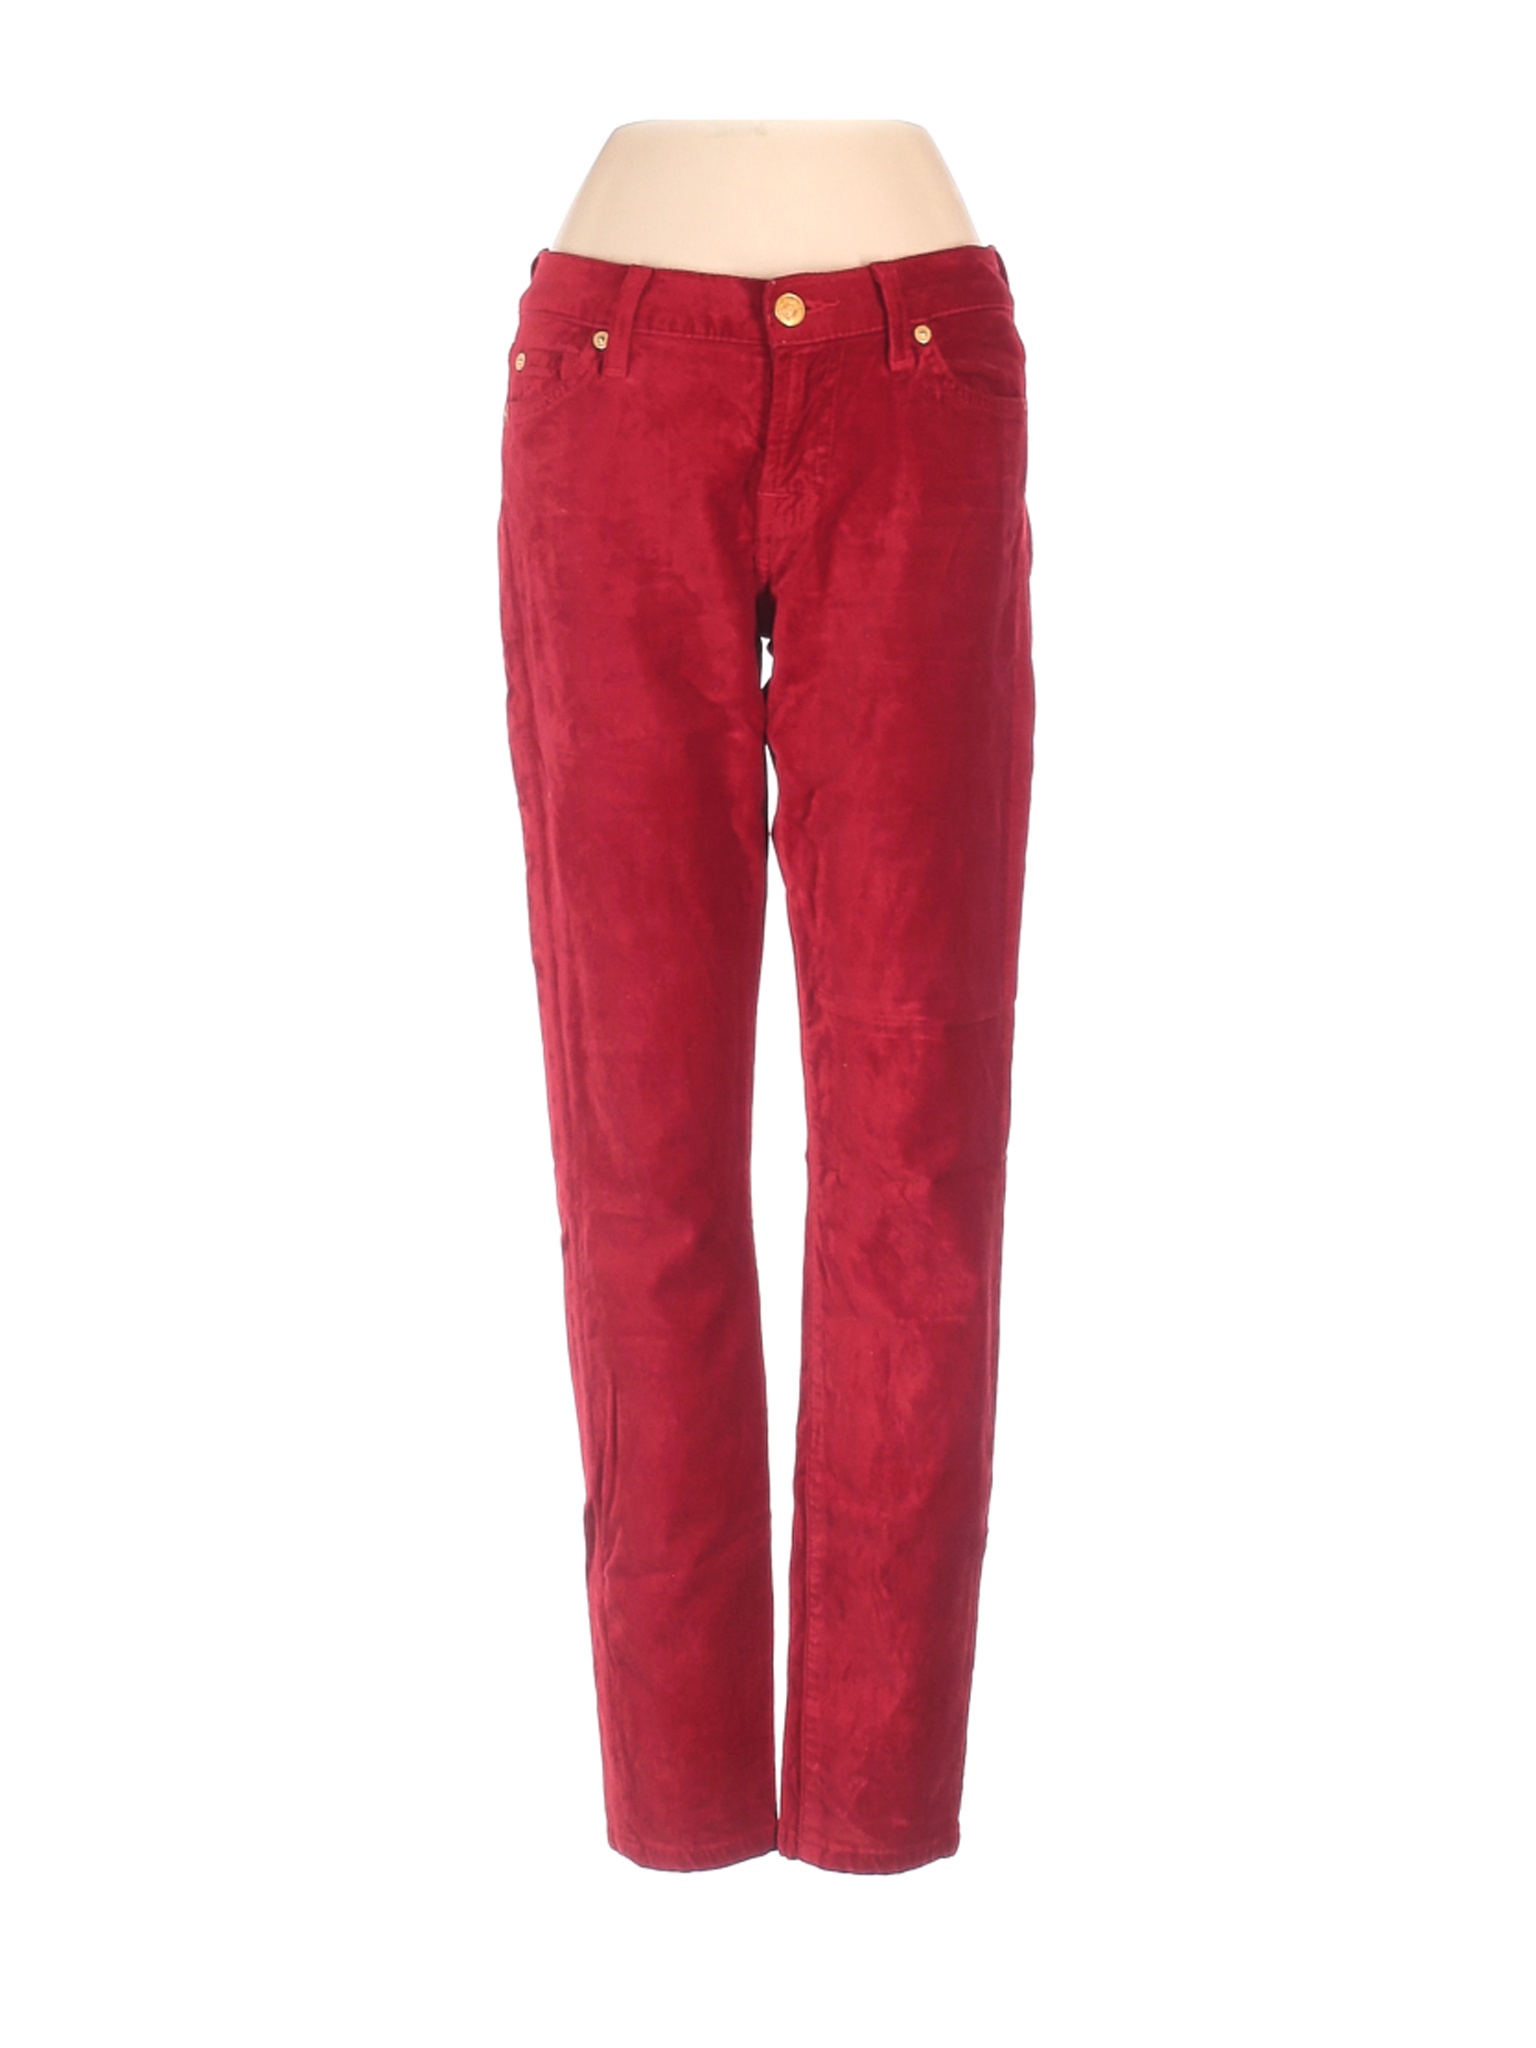 7 For All Mankind Women Red Velour Pants 26W | eBay